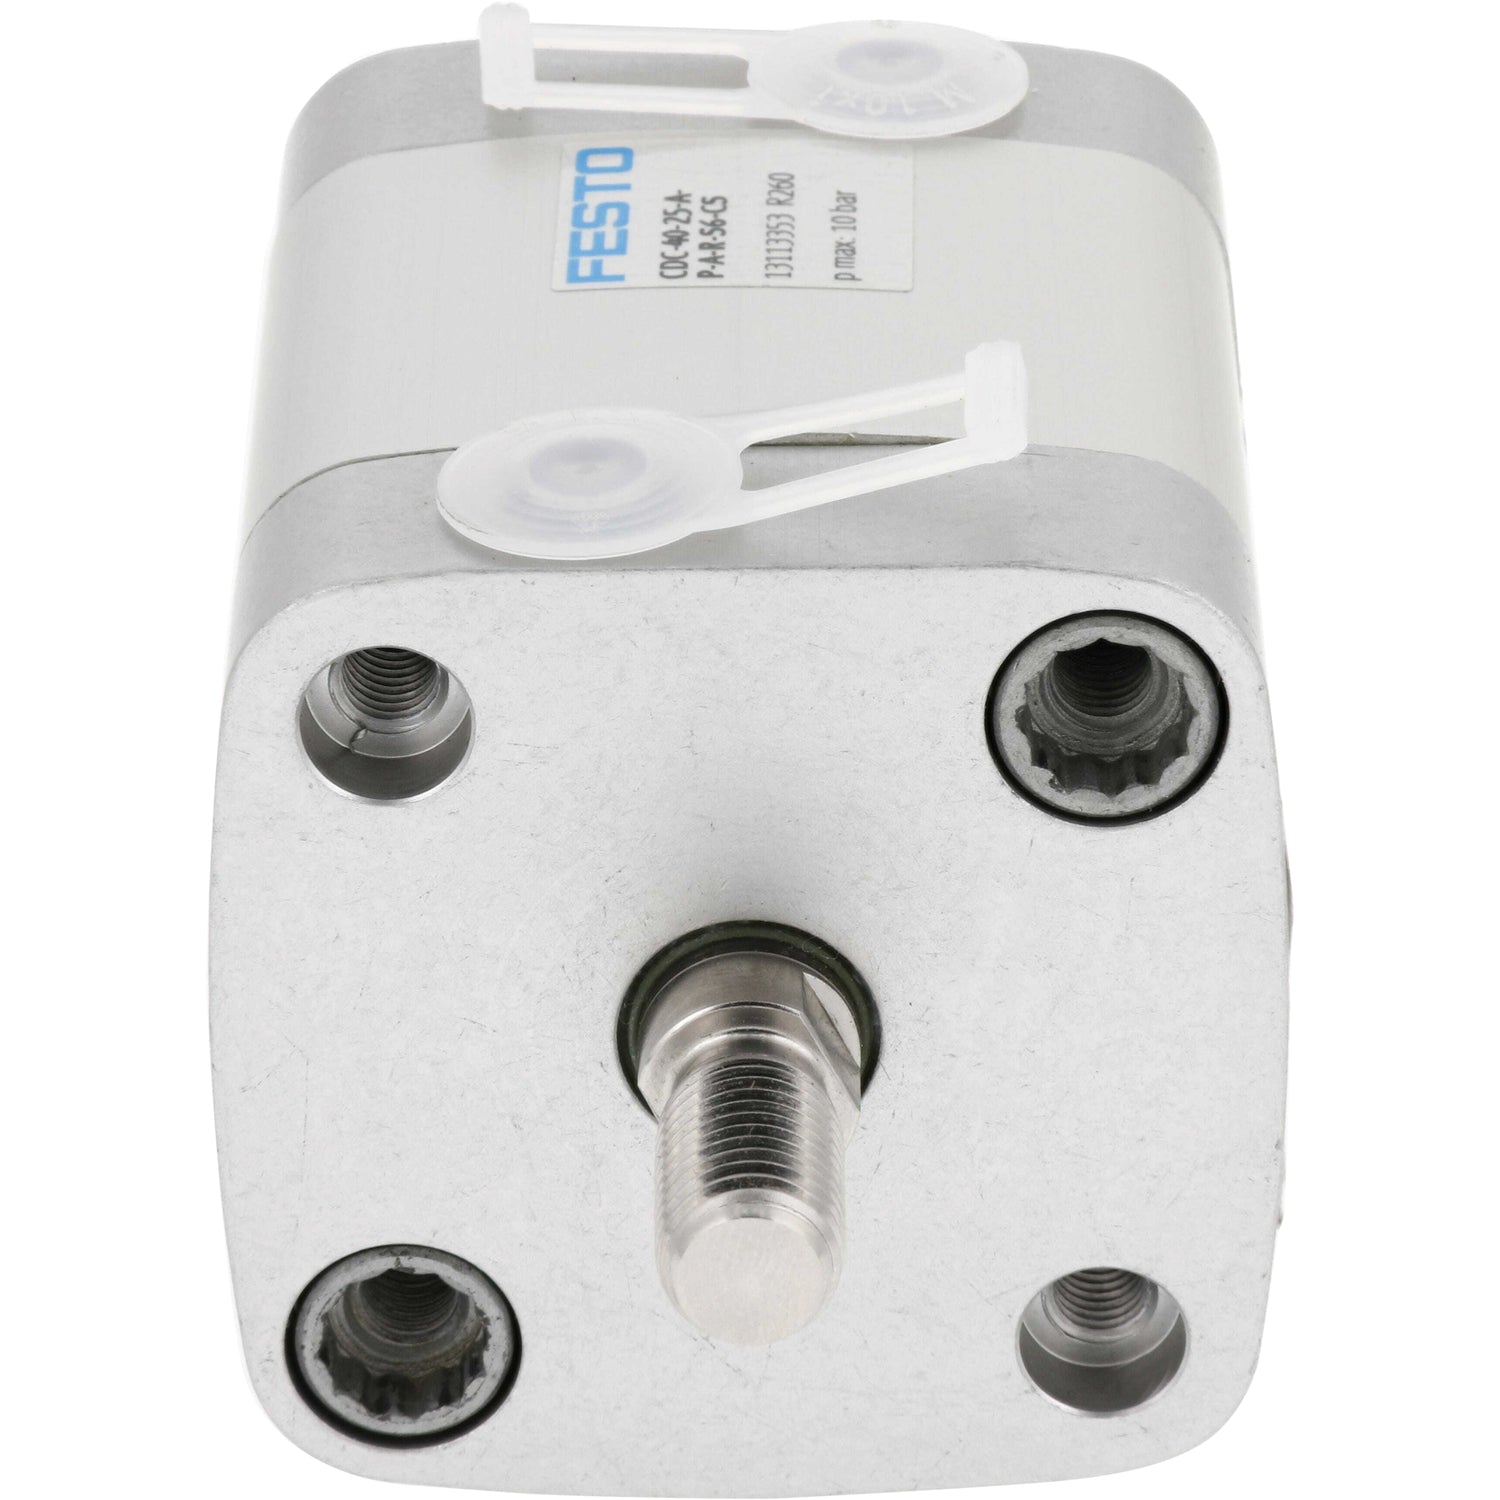 Compact cube shaped silver pneumatic cylinder shown on white background. 